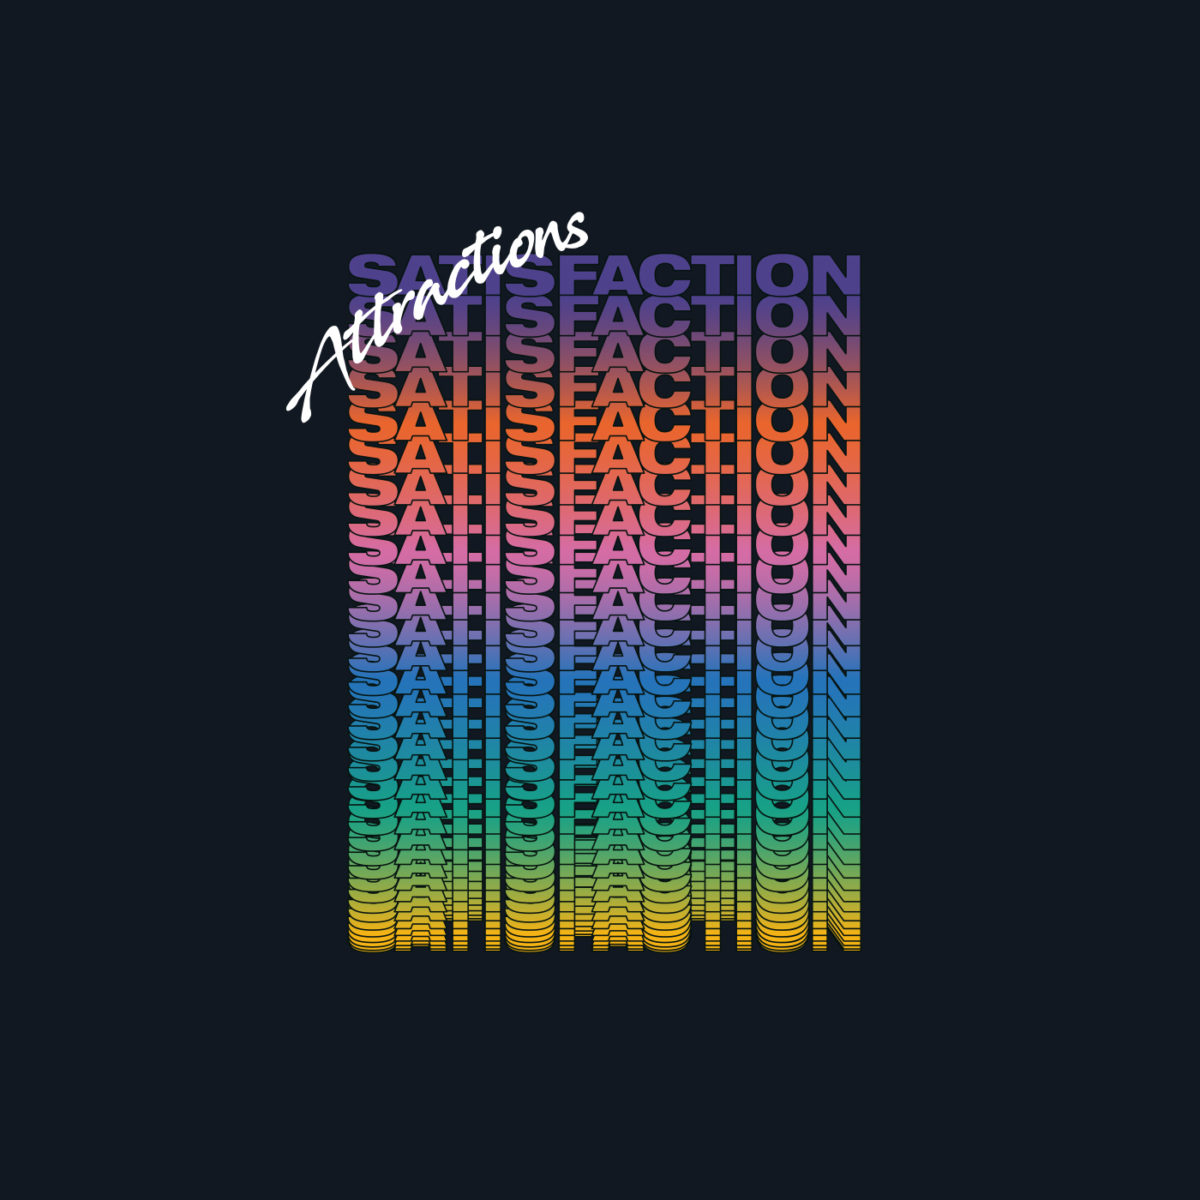 Attractions《Satisfaction》封面照